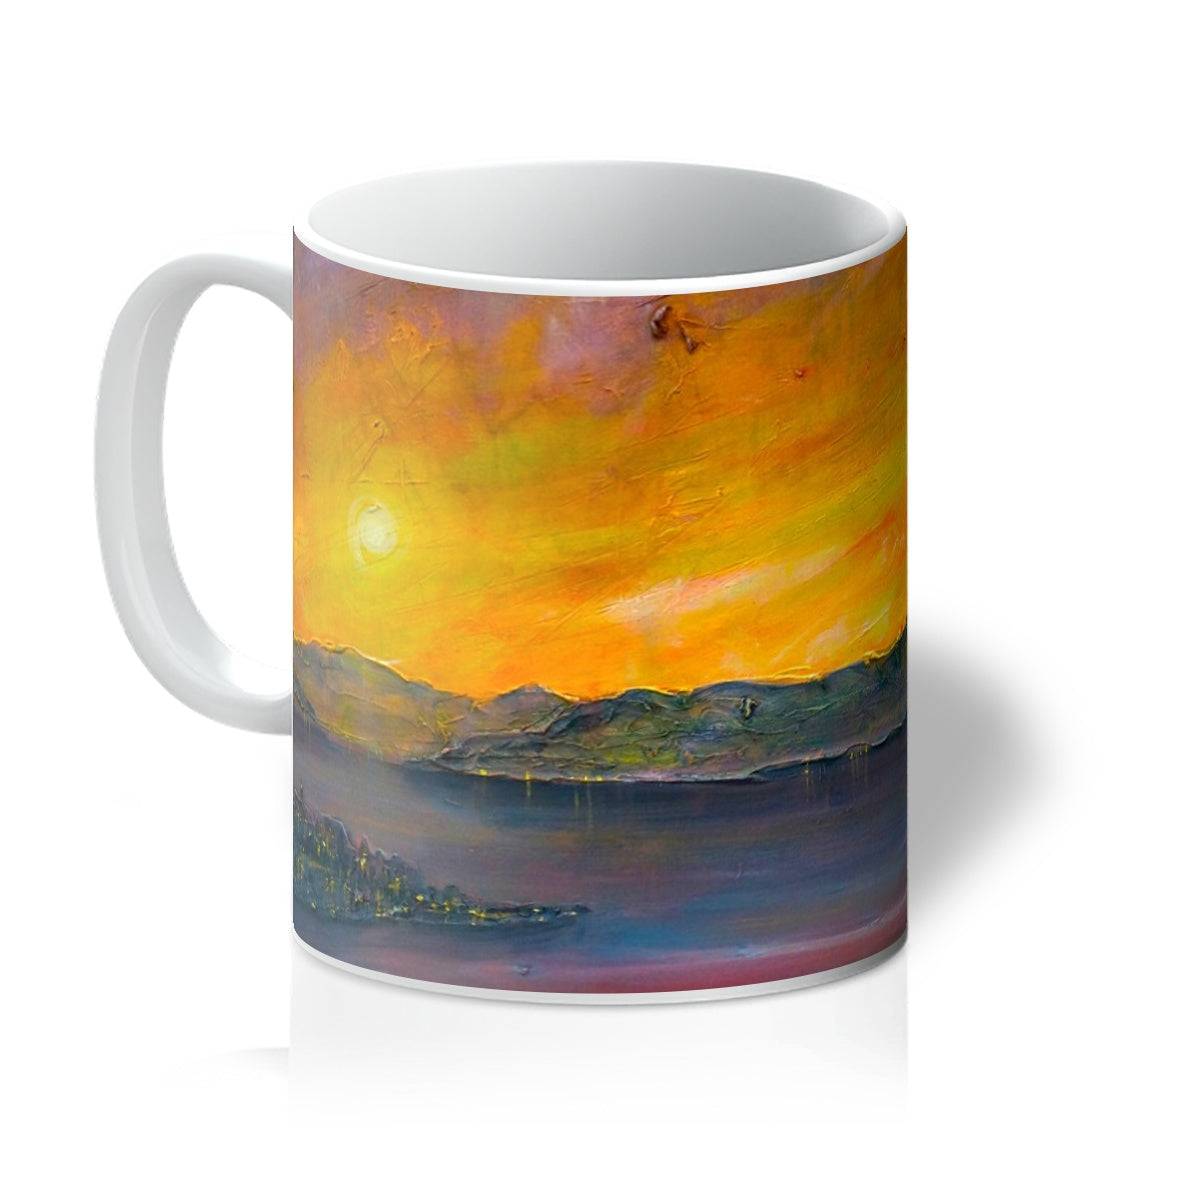 Sunset Over Gourock Art Gifts Mug-Mugs-River Clyde Art Gallery-11oz-White-Paintings, Prints, Homeware, Art Gifts From Scotland By Scottish Artist Kevin Hunter